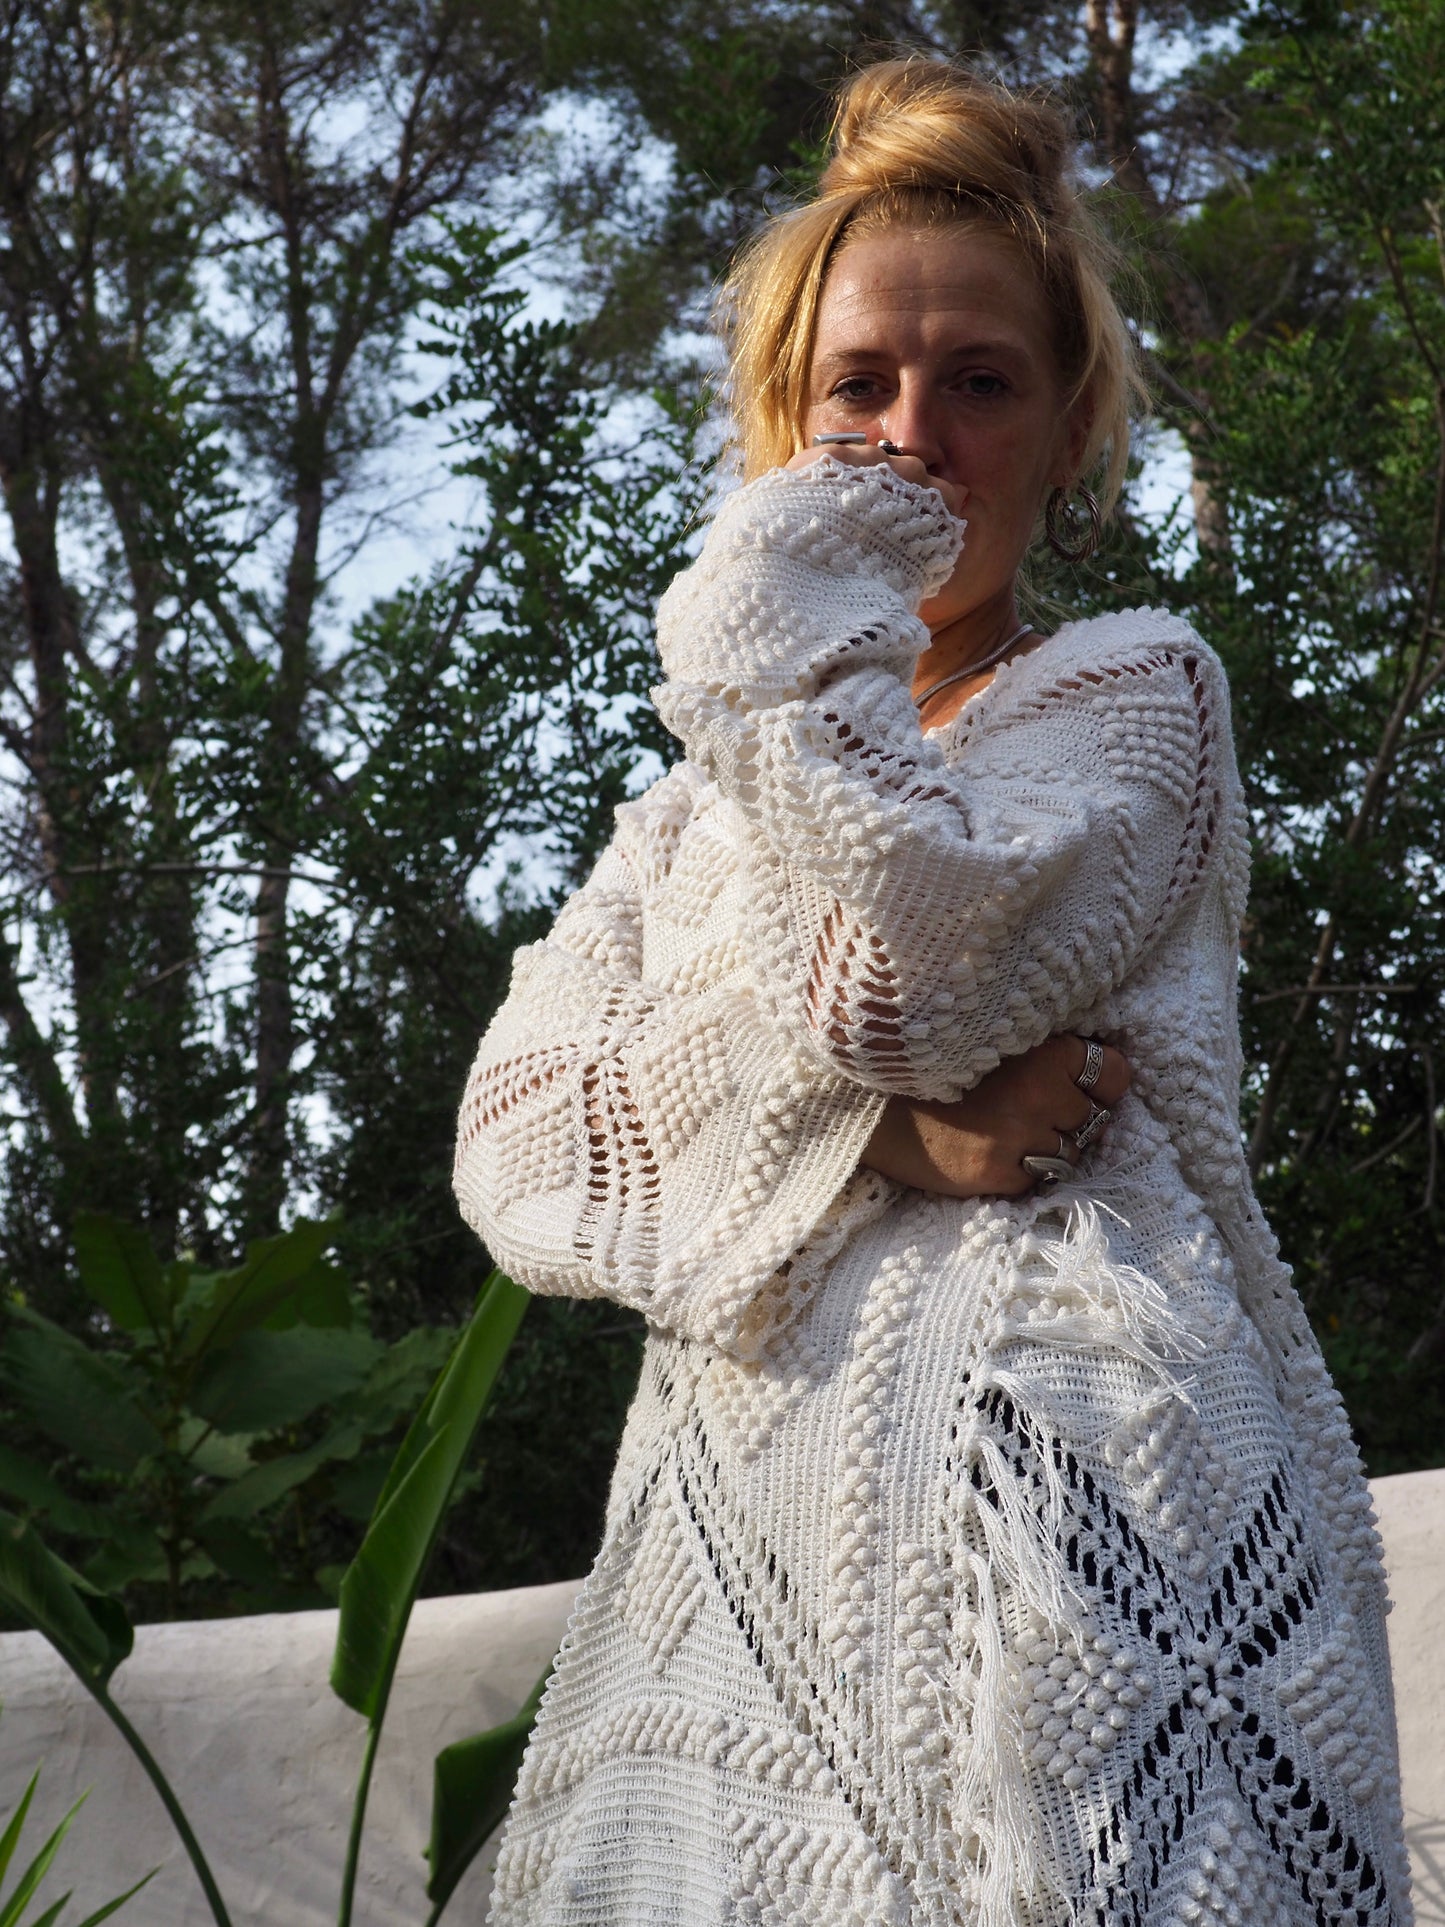 White vintage crochet long jacket up-cycled by Vagabond Ibiza with cute tassel trim.